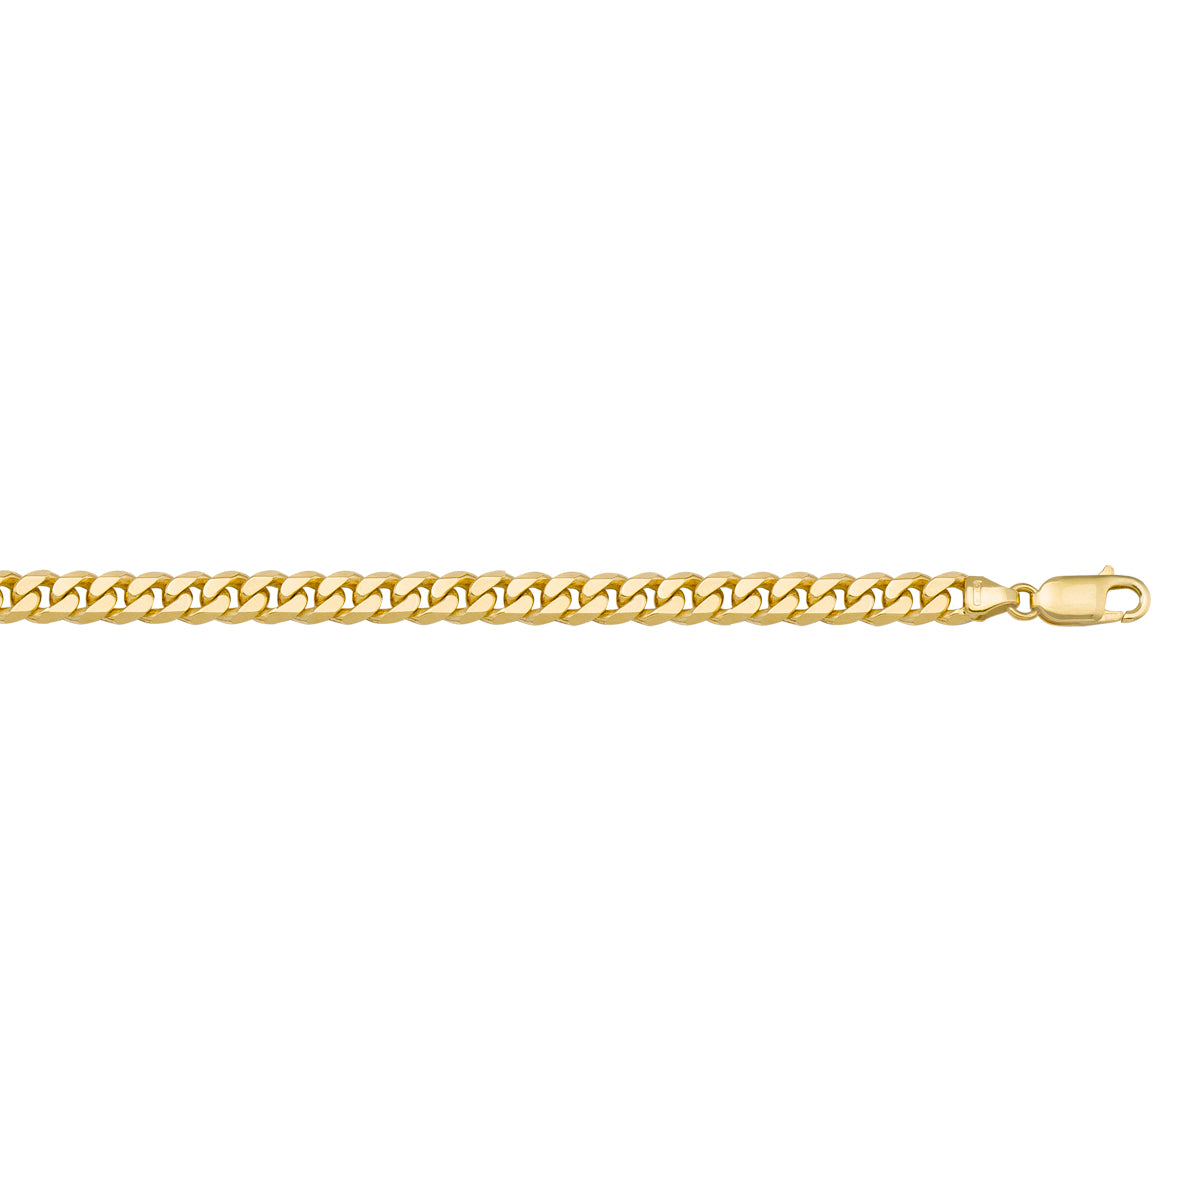 BRACELETS YELLOW GOLD SOLID FLAT BEVELED LINK CHAIN